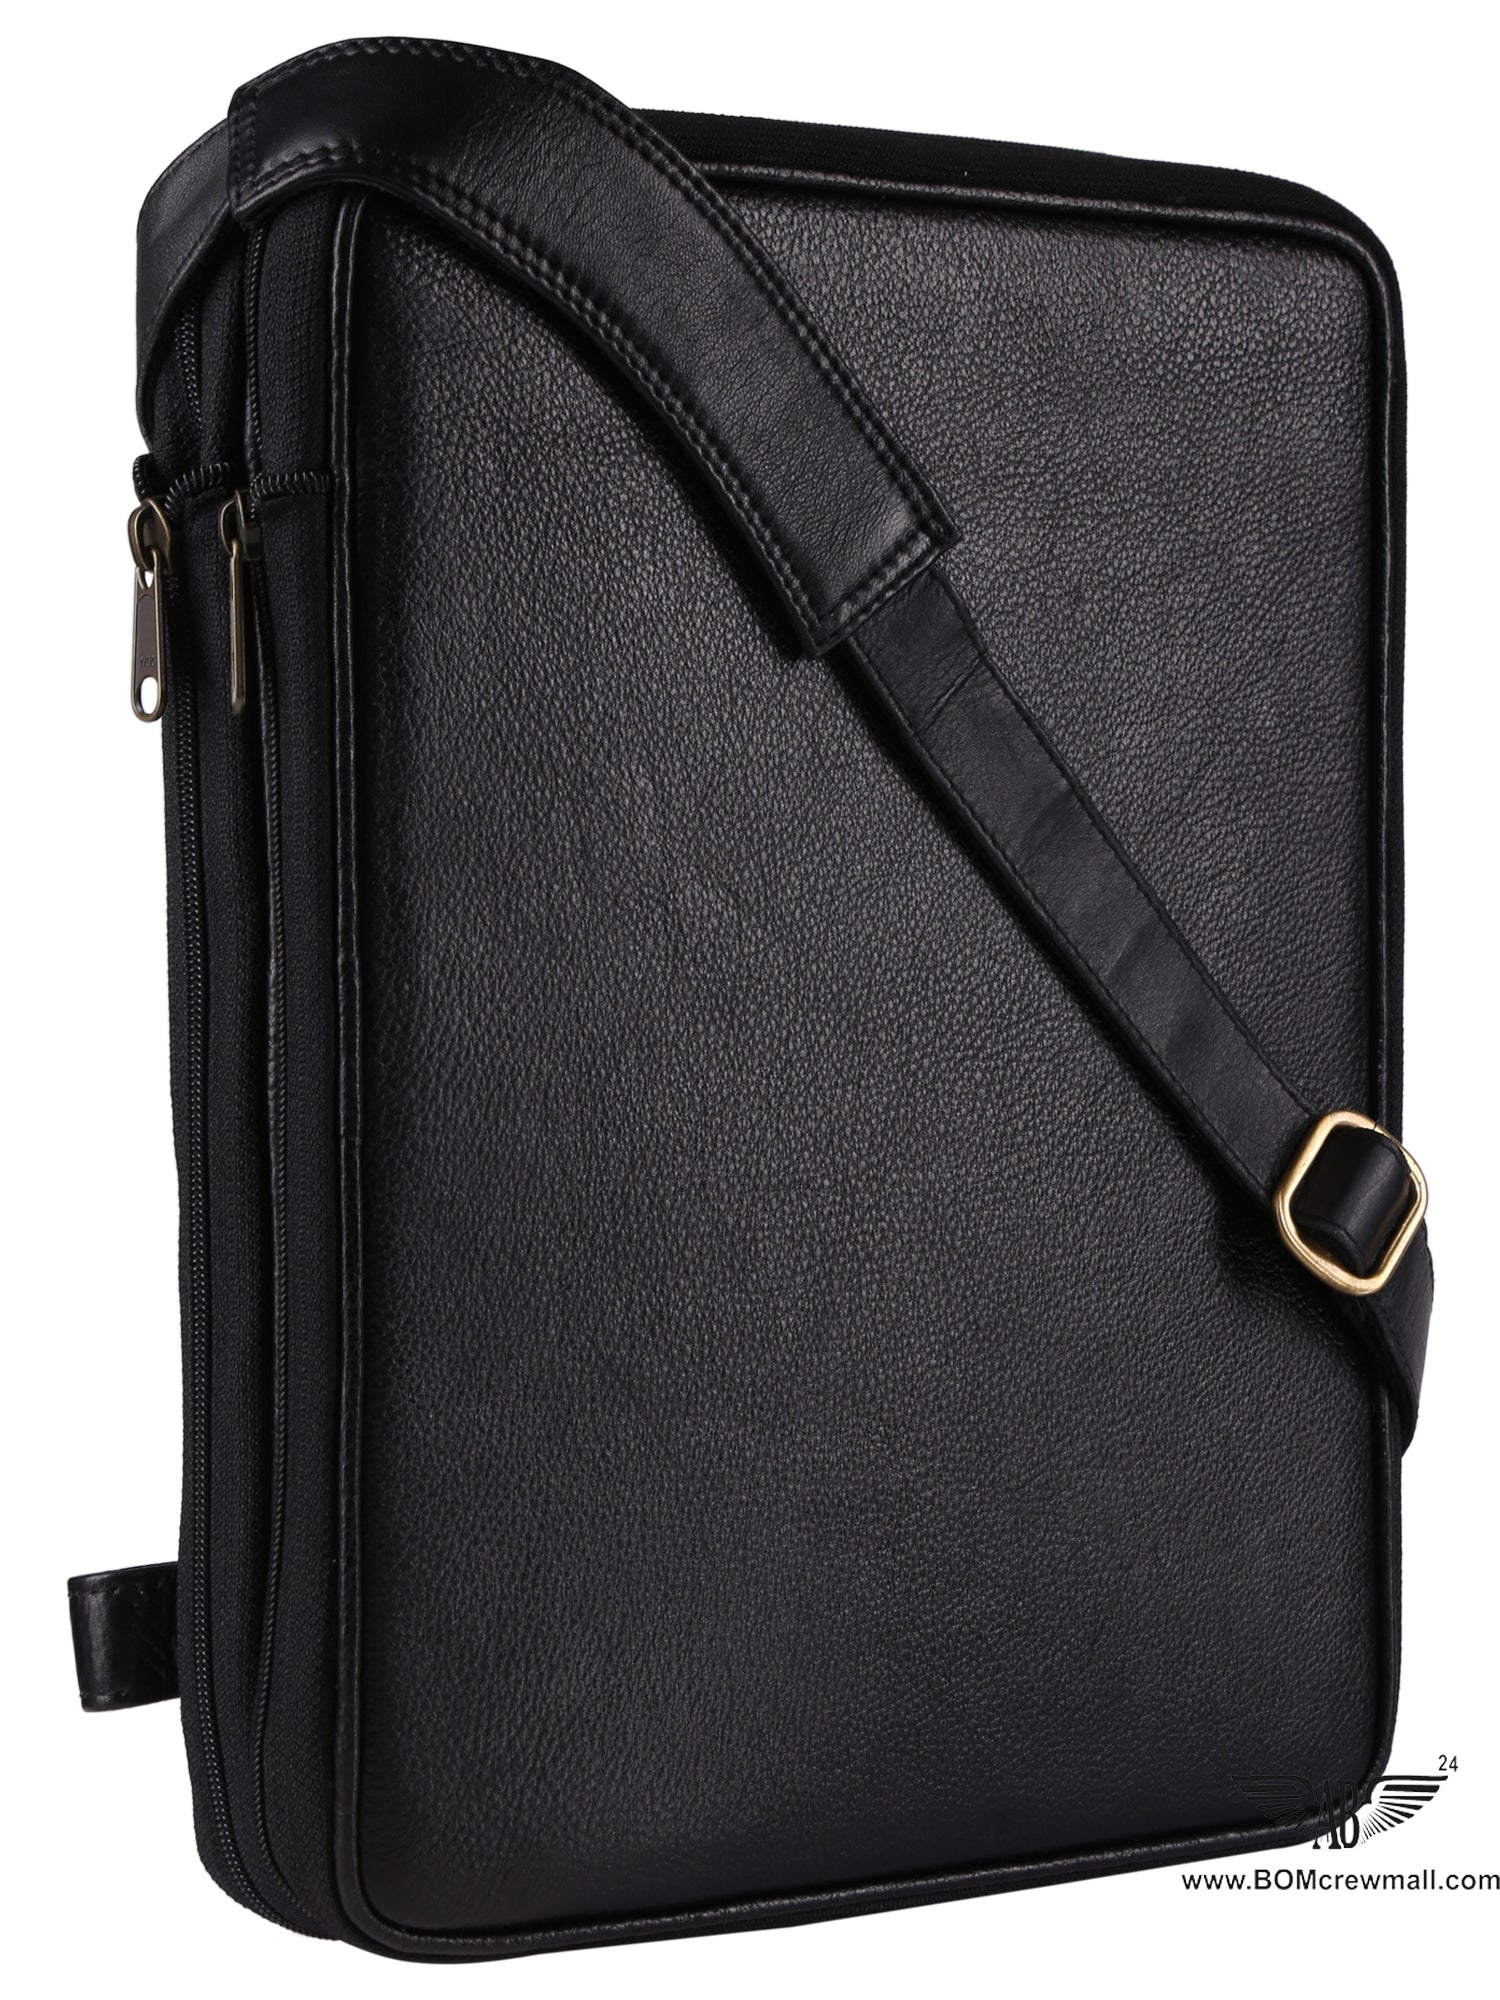 Side image of black COLLAPSIBLE WINE BAG